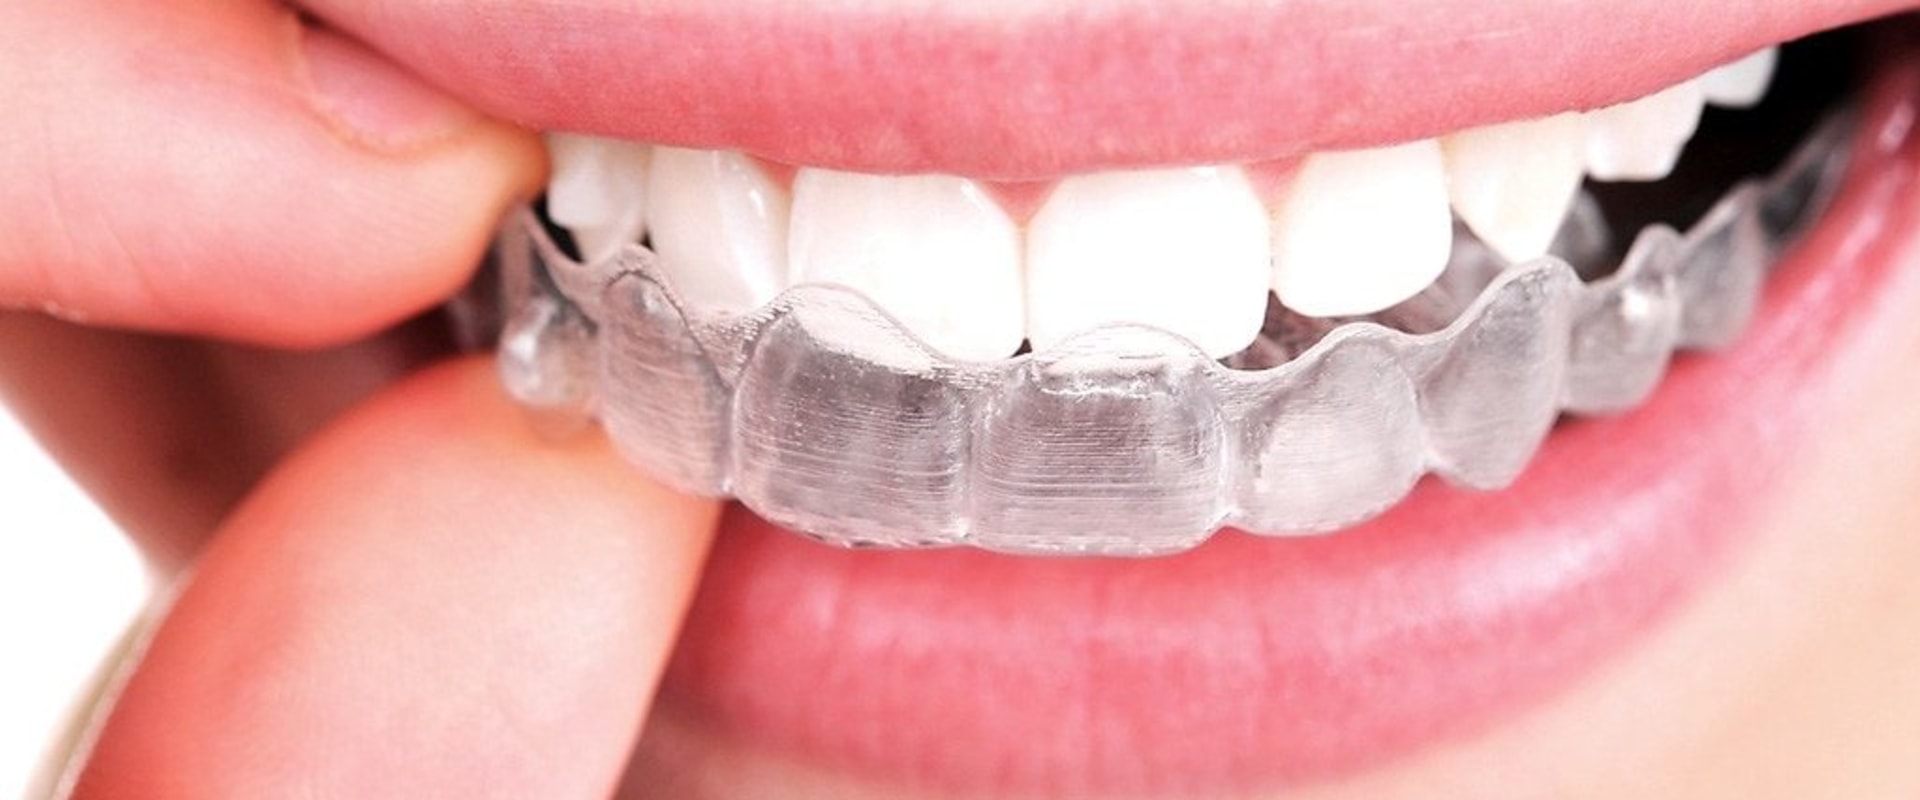 What To Expect During Invisalign Dental Treatment As Part Of Your Preventive Health Care Plan In Texas